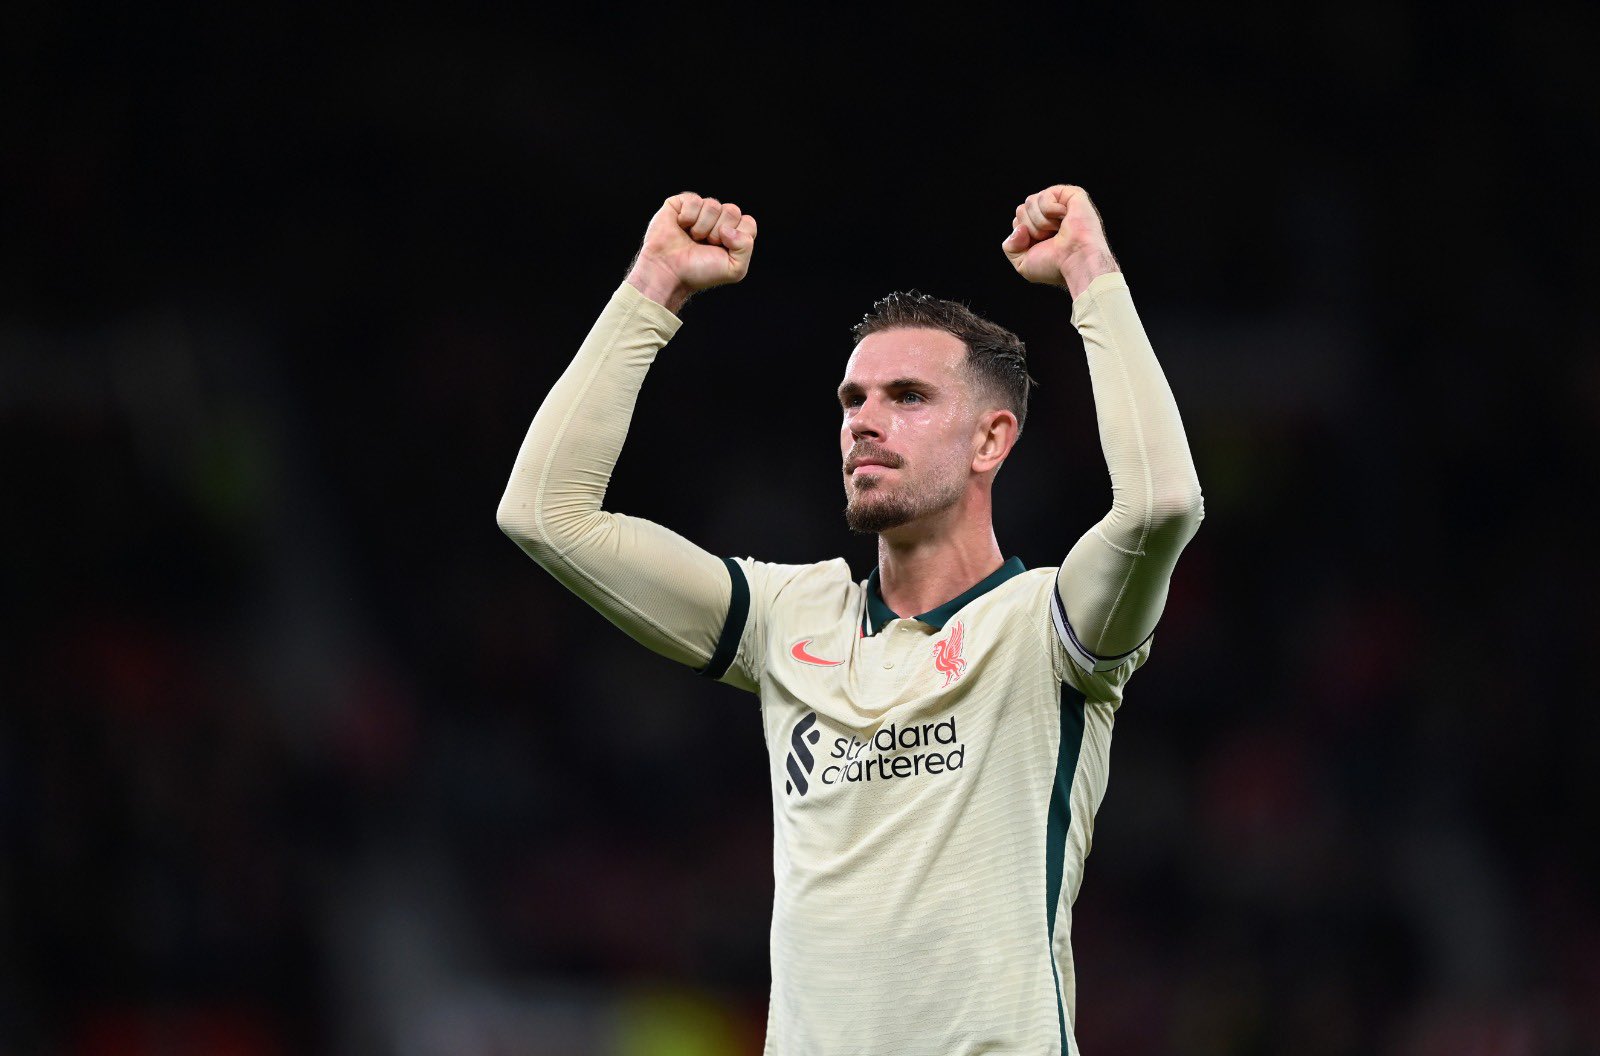 Disappointed with the goals we conceded but we showed great spirt, proclaims Jordan Henderson